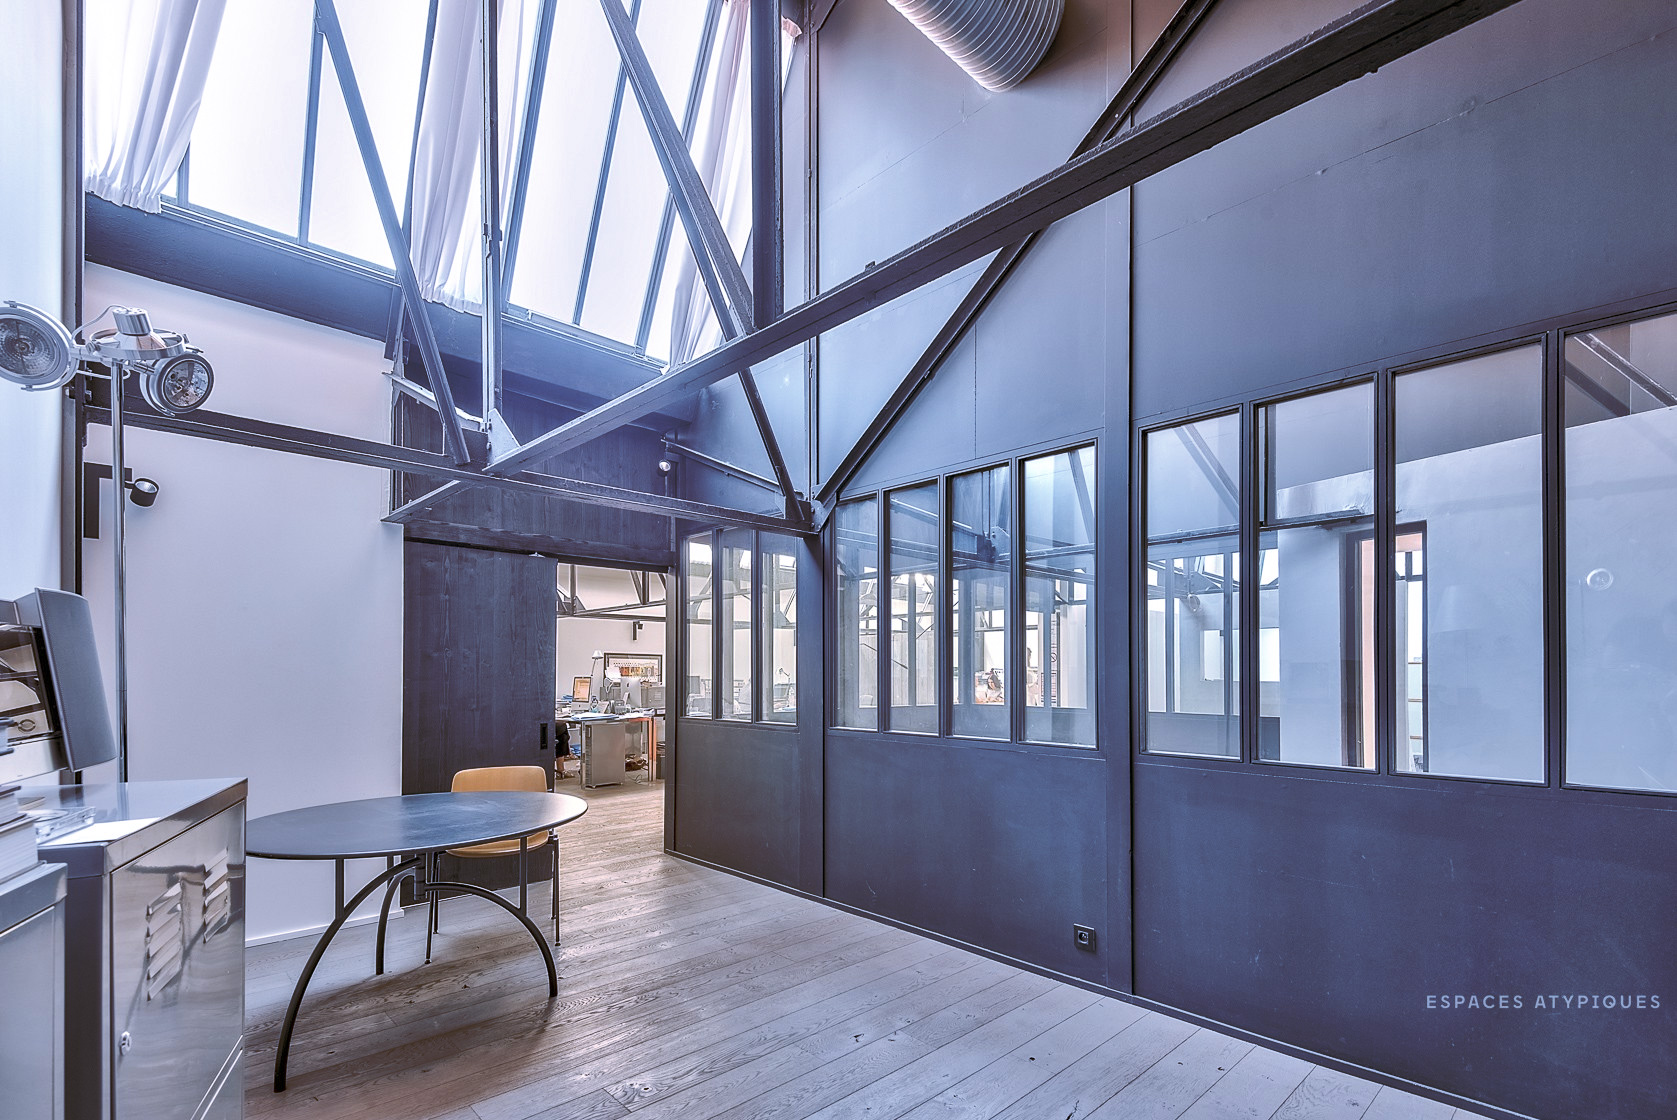 Live/work loft in a converted metalworks near Paris lists for €2.2m